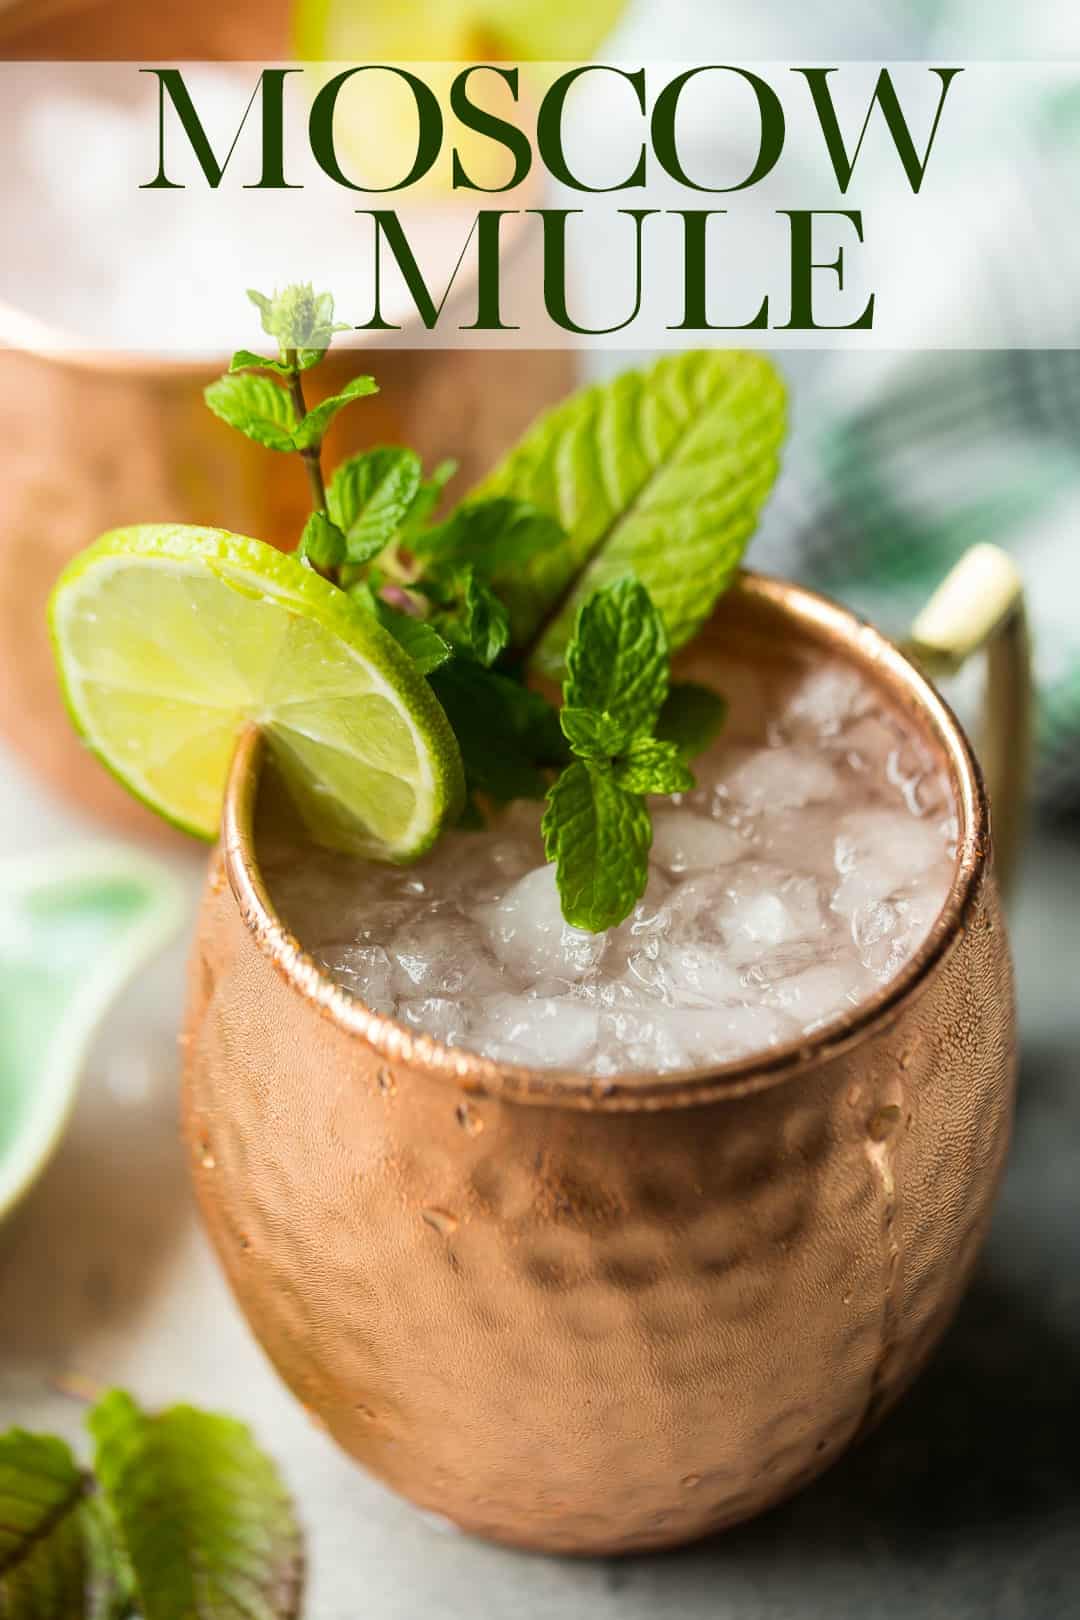 Moscow mule cocktail in a copper mug with a text overlay above that reads "Moscow Mule."